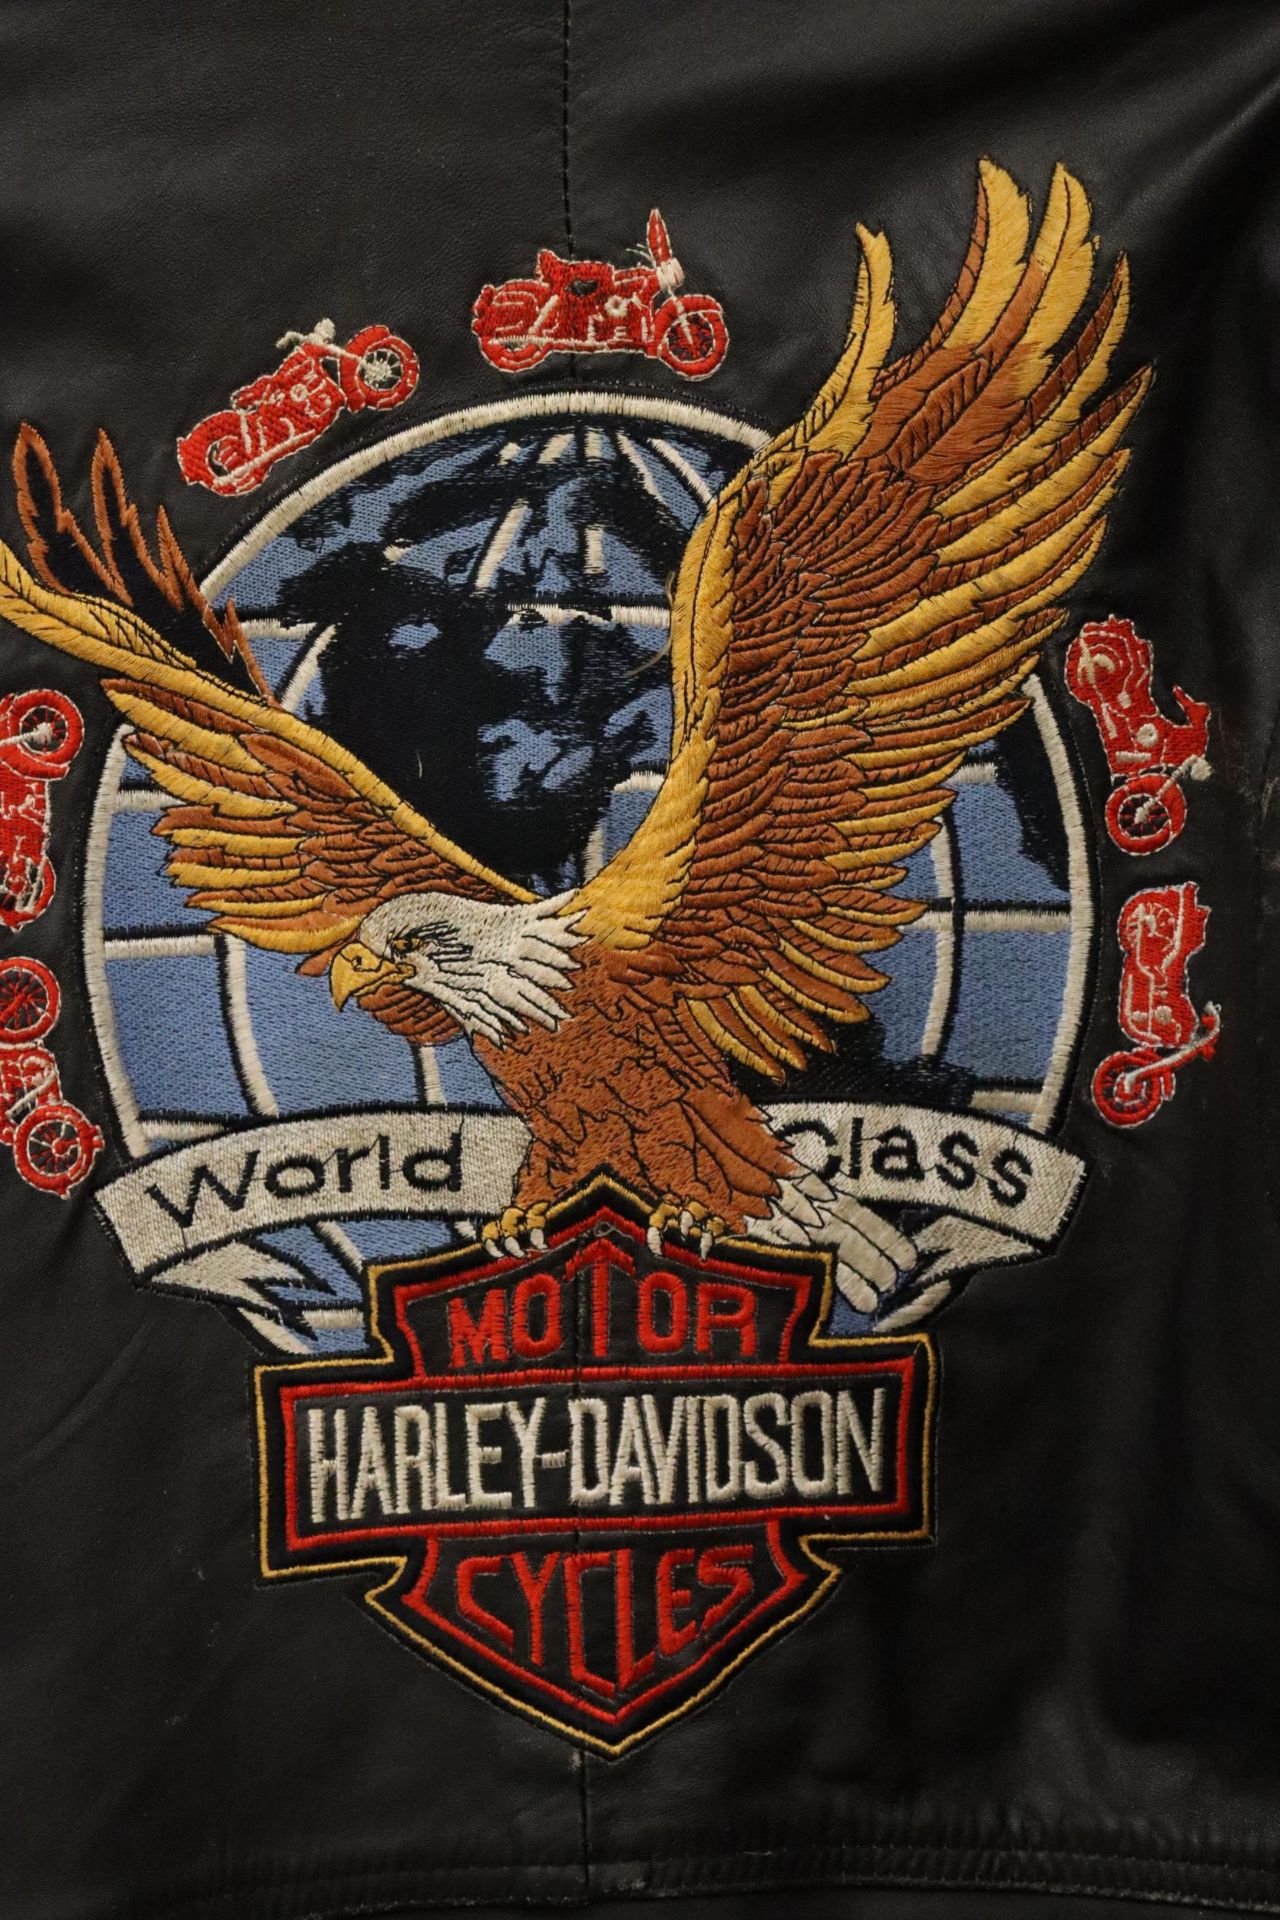 A VINTAGE HARLEY DAVIDSON LEATHER MOTOR CYCLE JACKET WITH LOGO TO THE BACK - Image 2 of 11